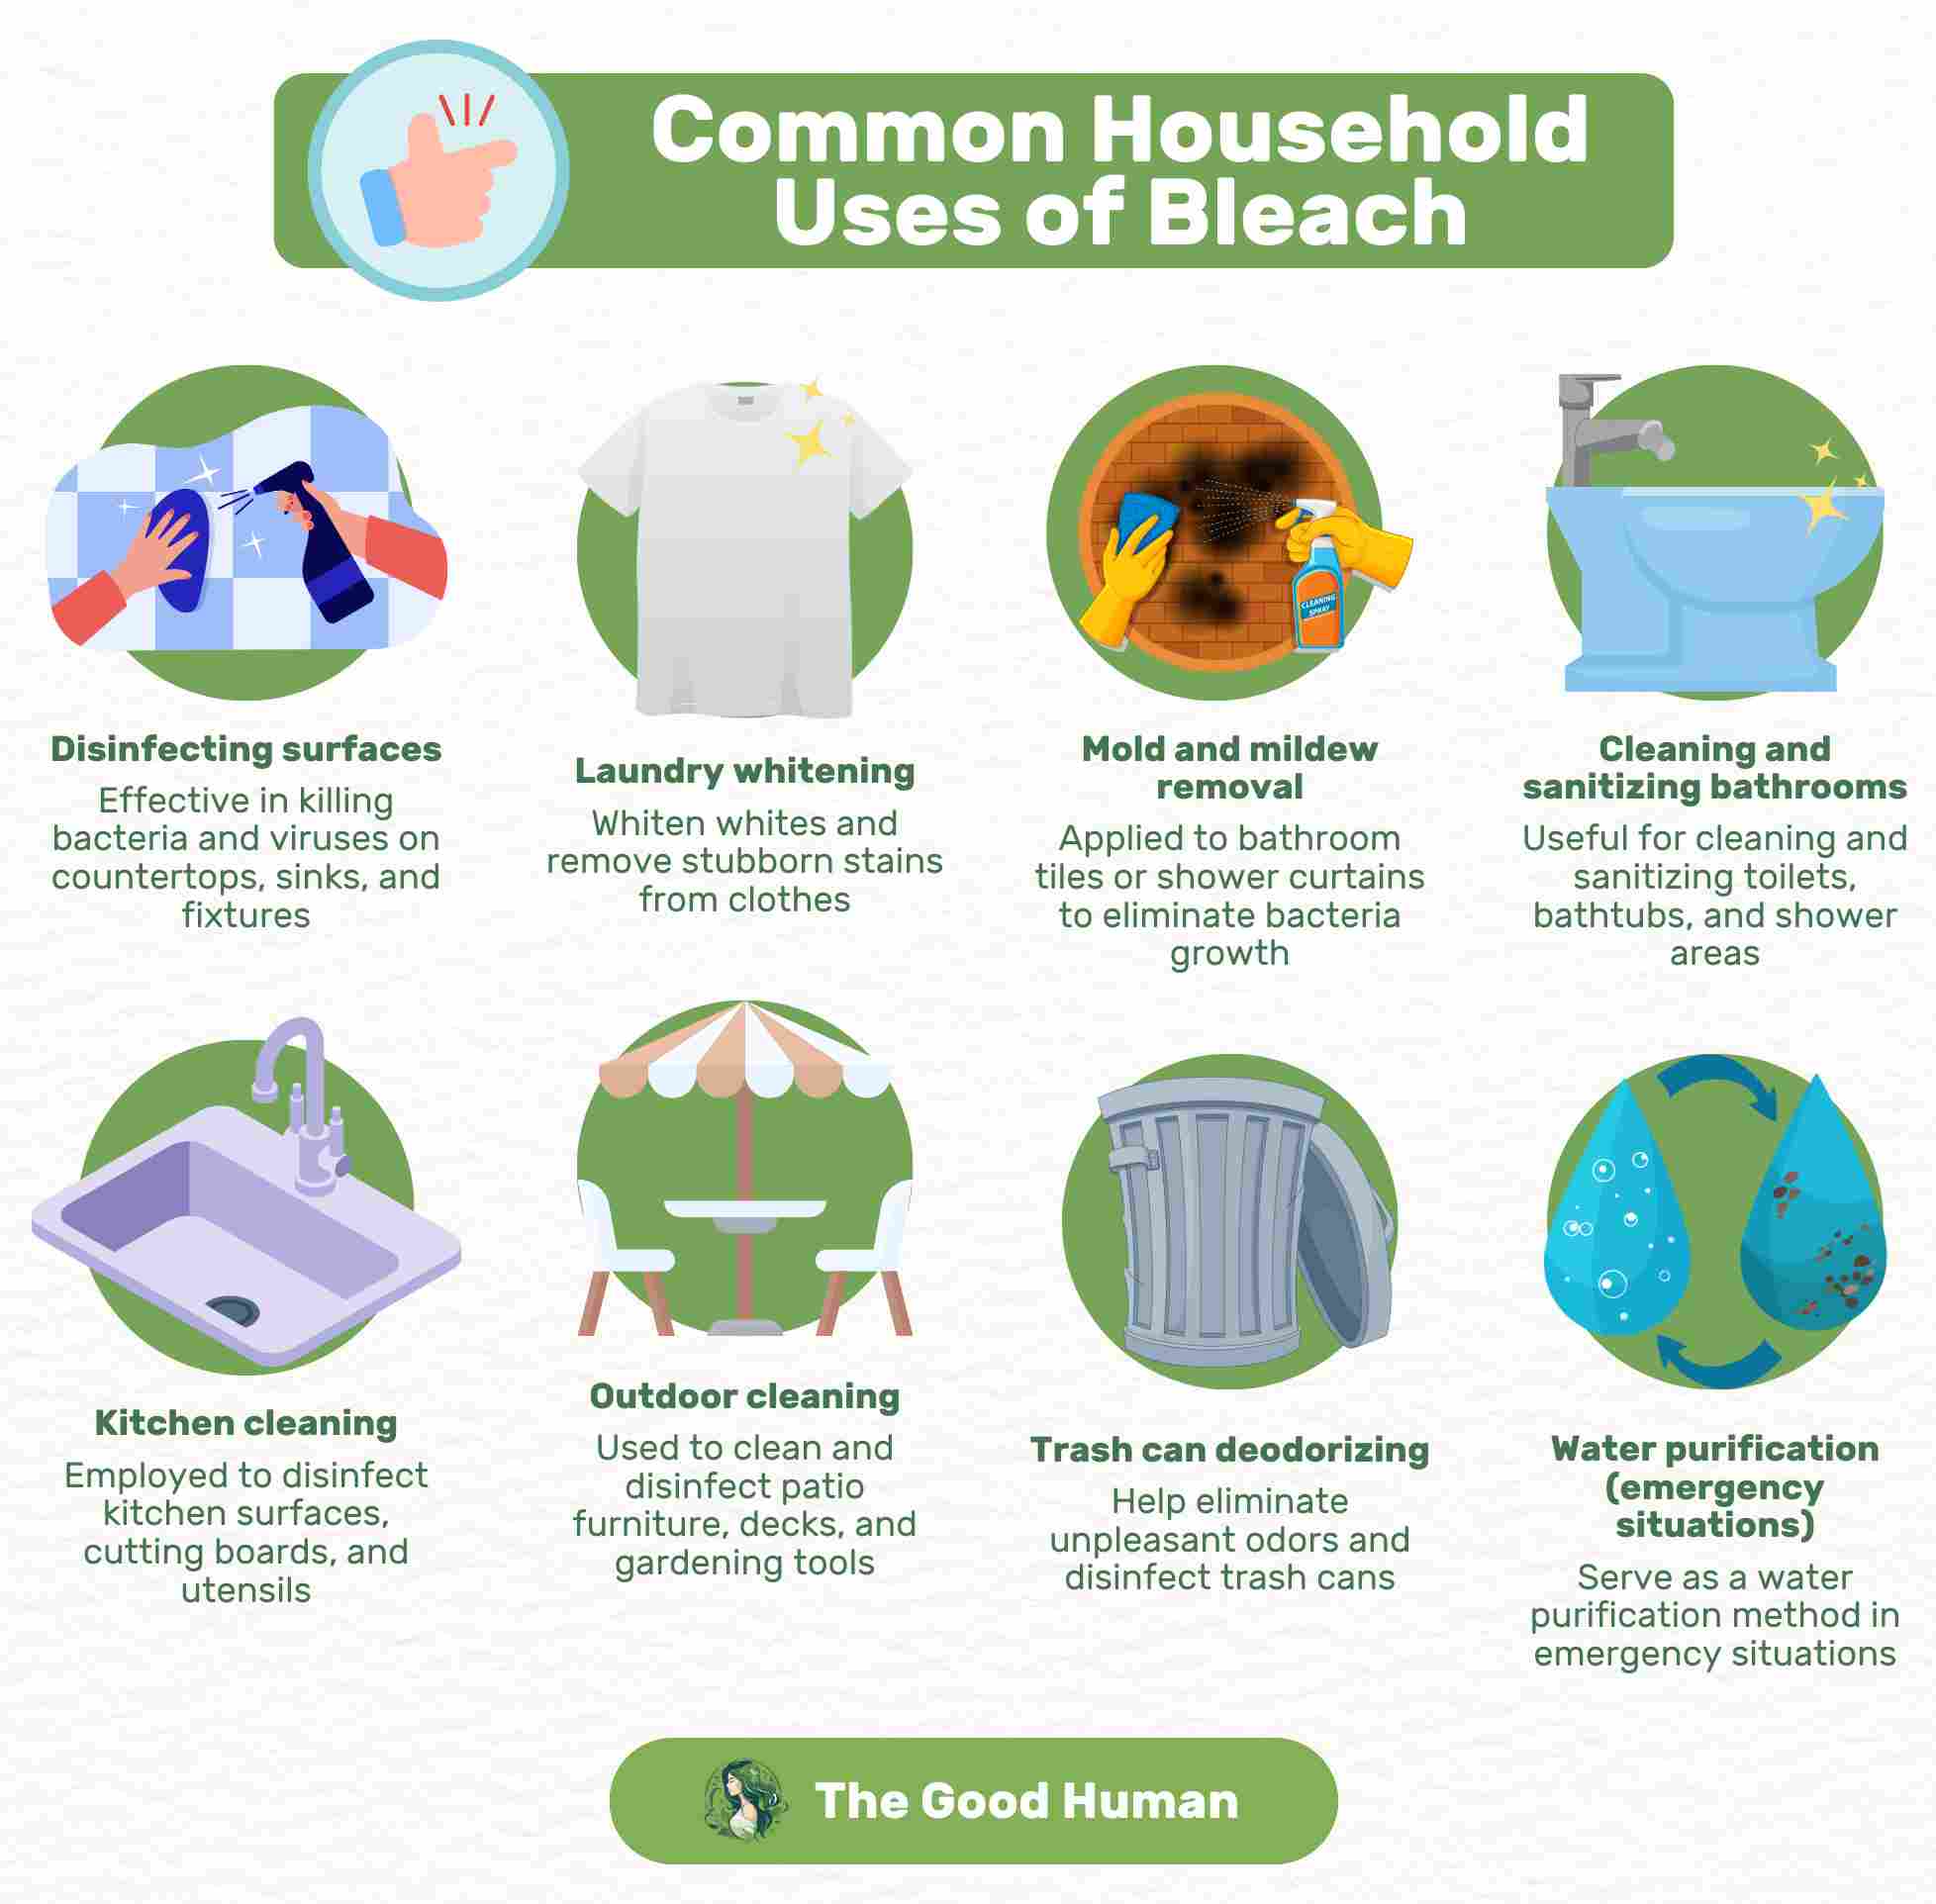 A table summarizing the common household uses of bleach.